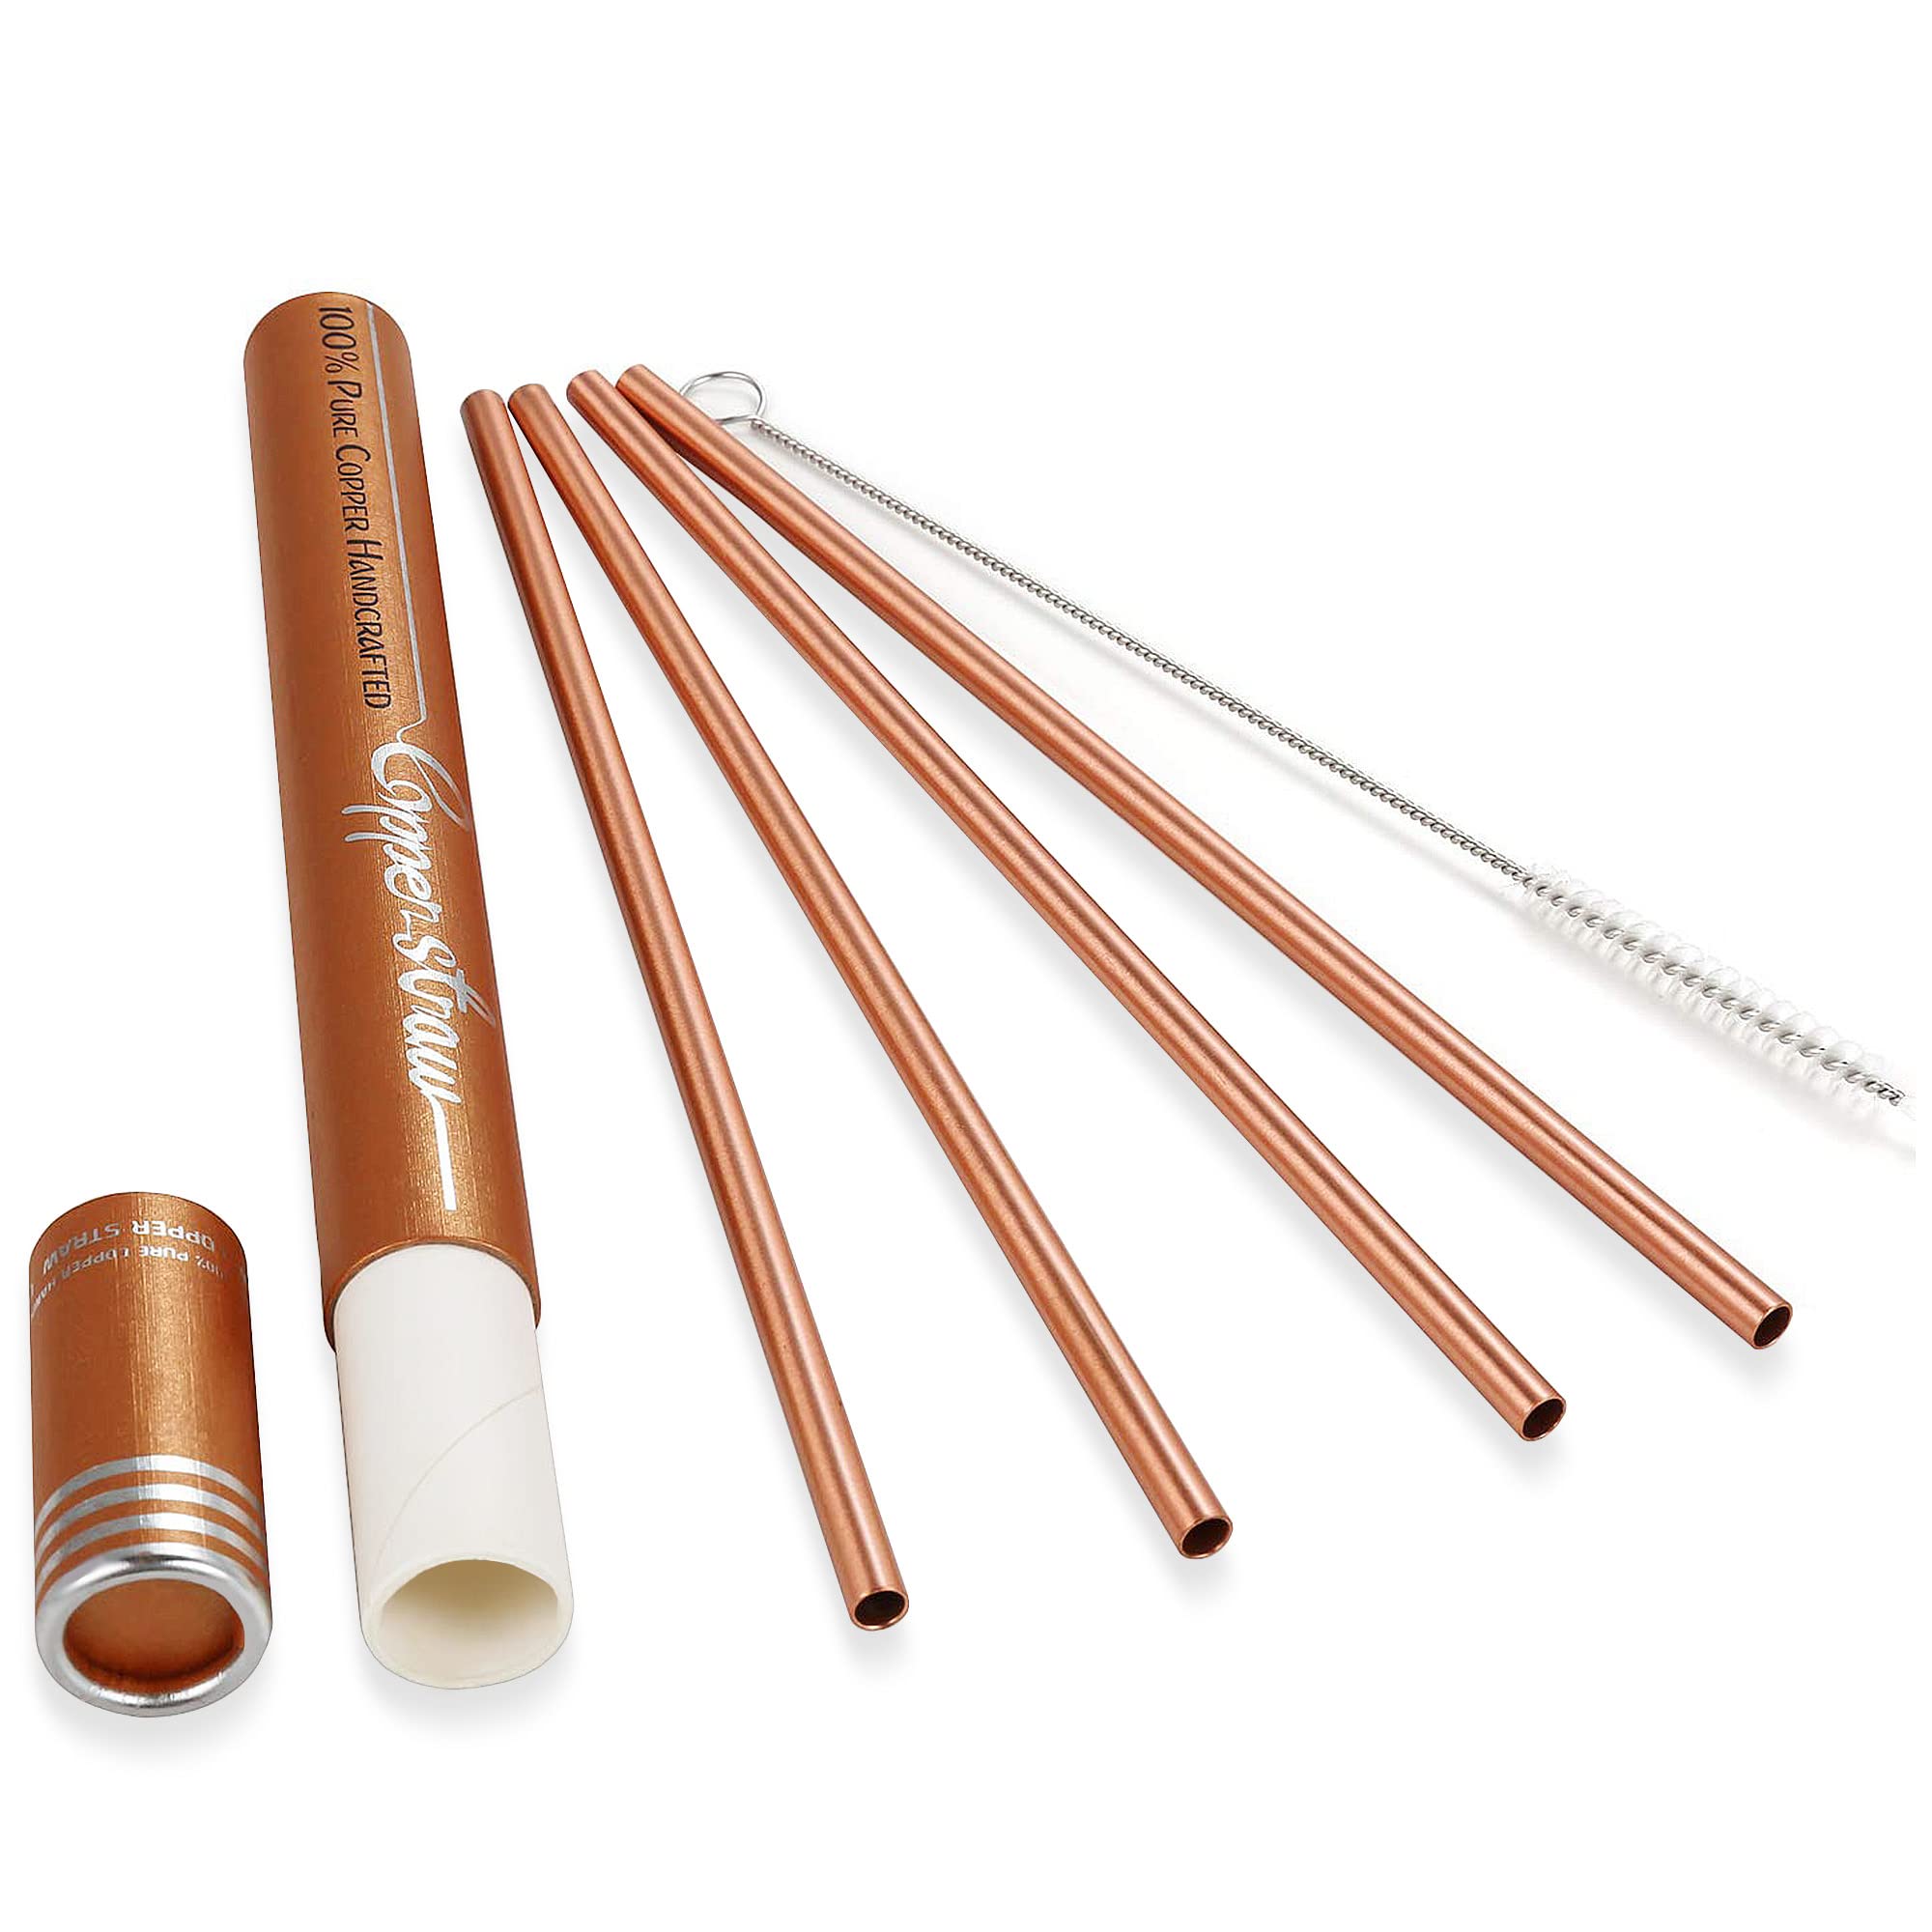 Copper Drinking Straws Gift Set- 8.5 inch Long Authentic Handcrafts Copper Straws with Cleaning Brush for Moscow Mule Mug (Set of 4)